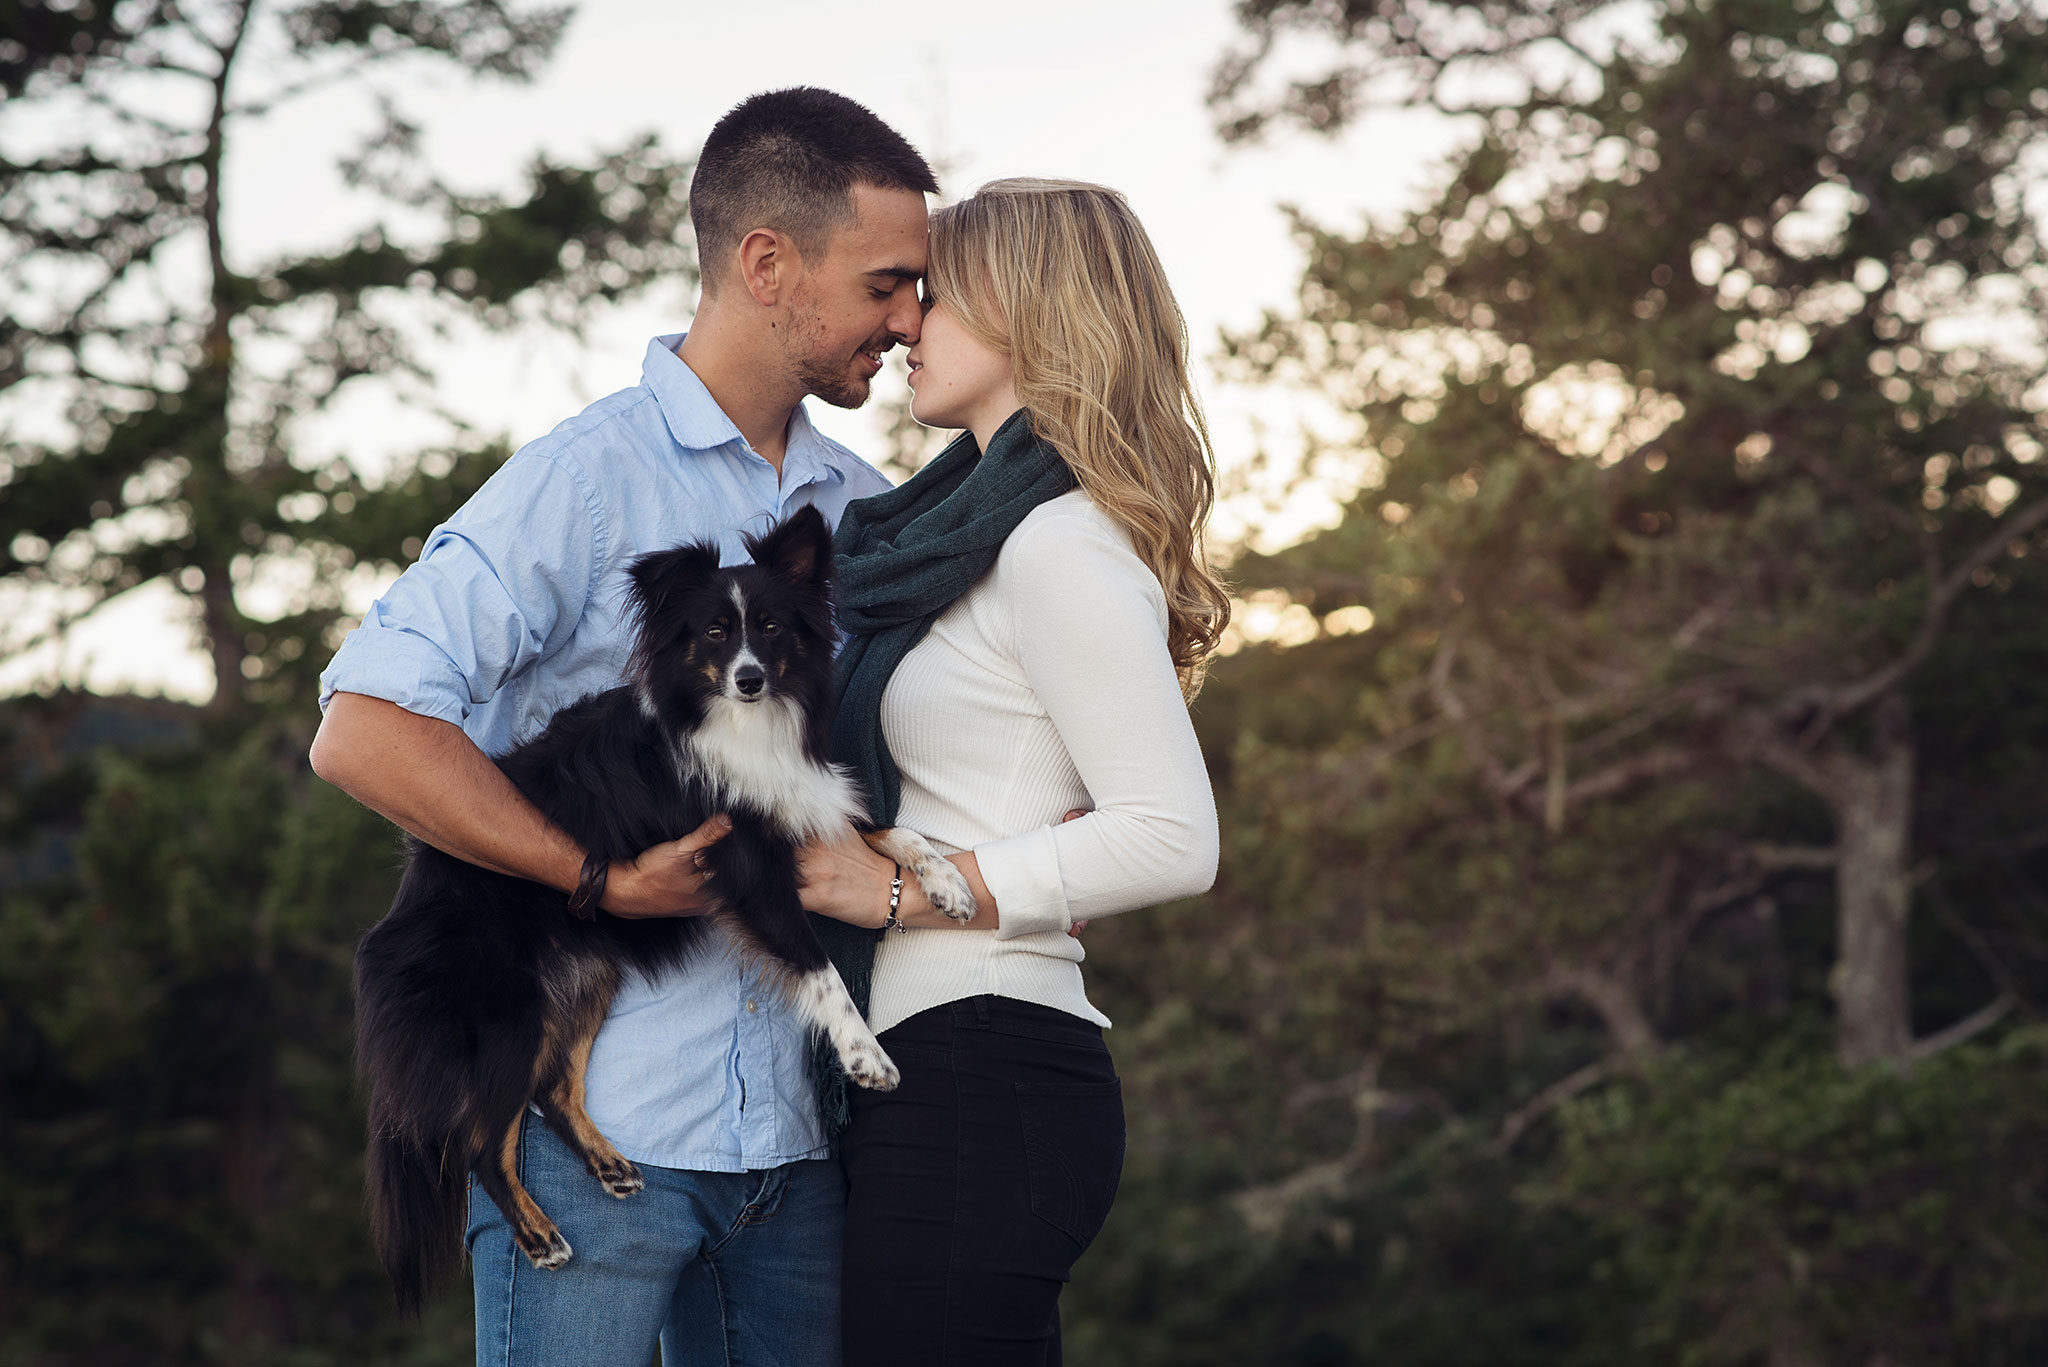 Sunset west coast engagement session with dog at East Sooke Park near Victoria, BC.